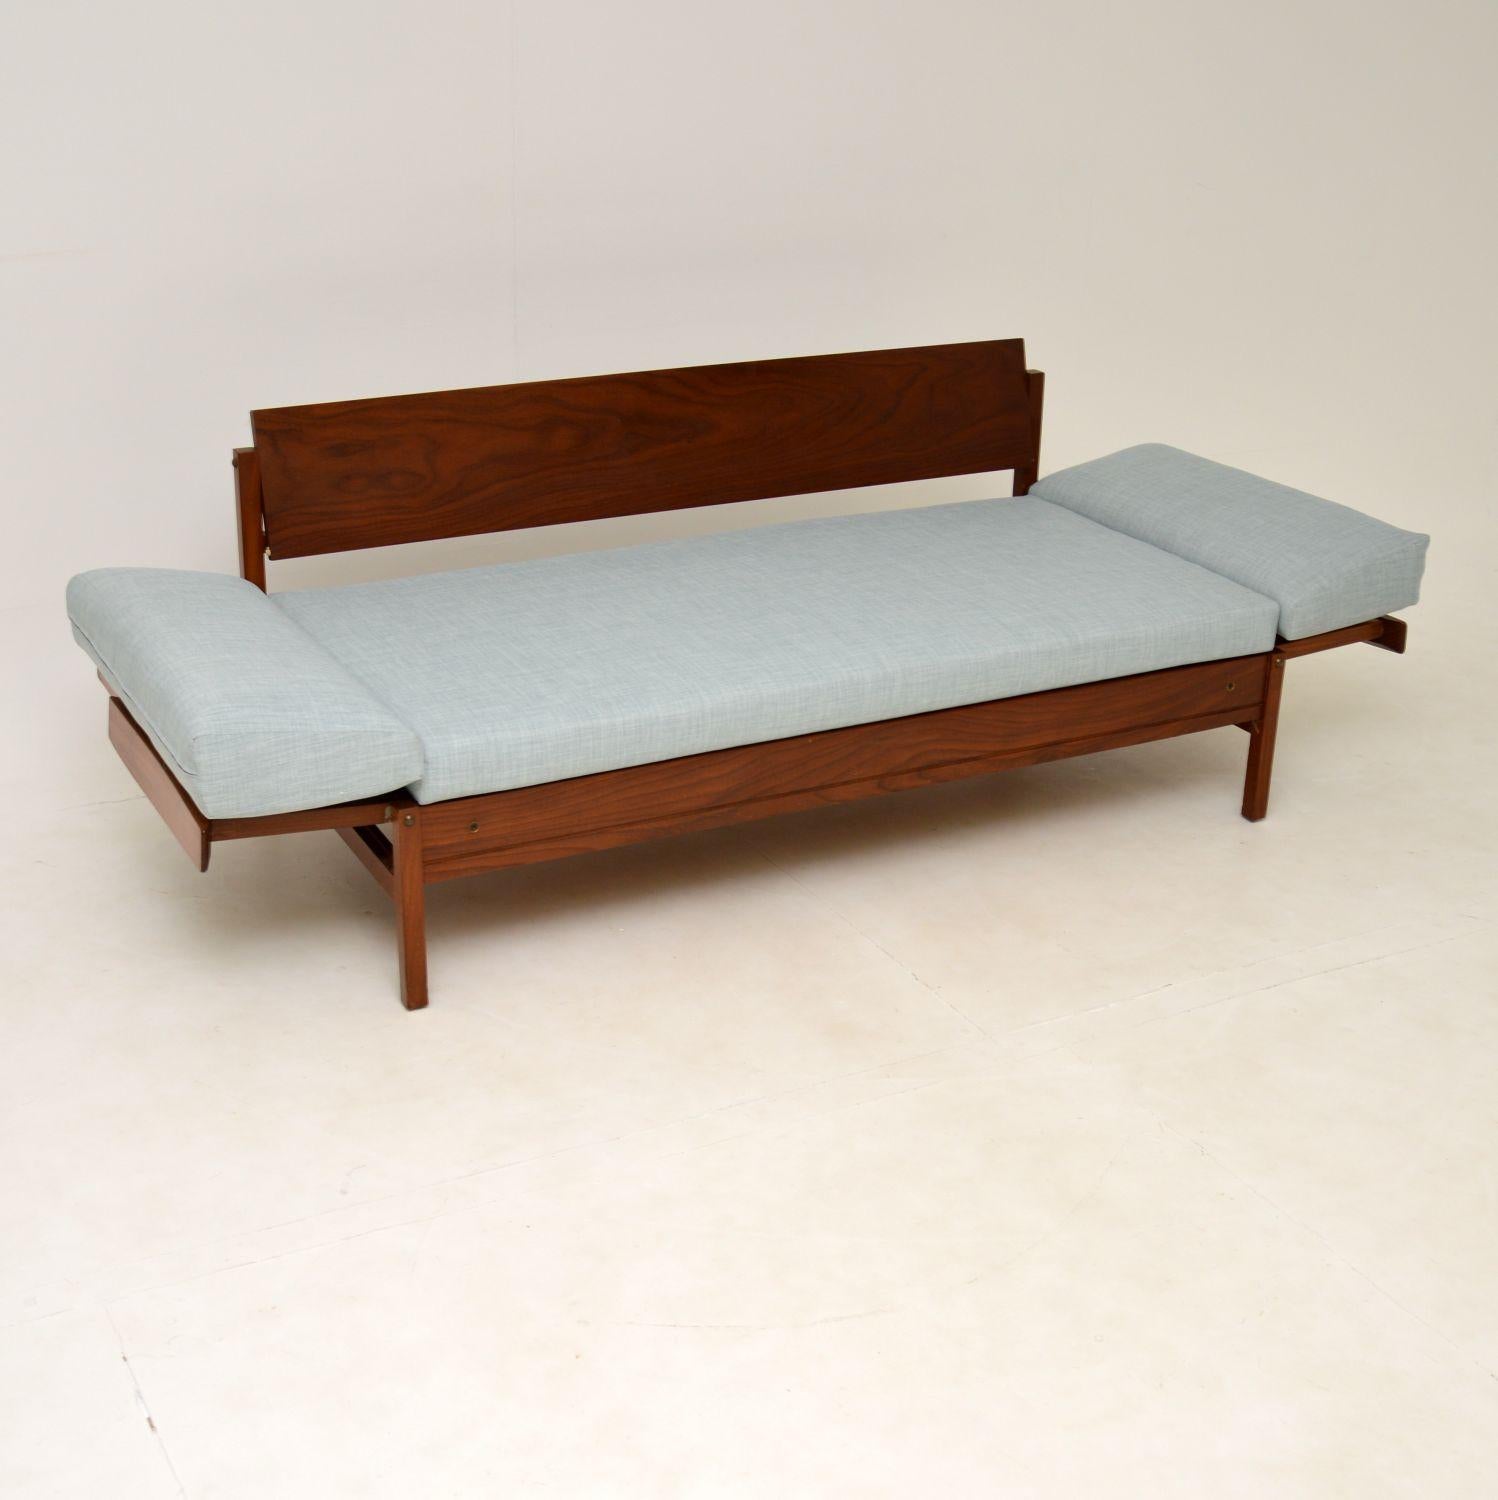 guy rogers sofa bed